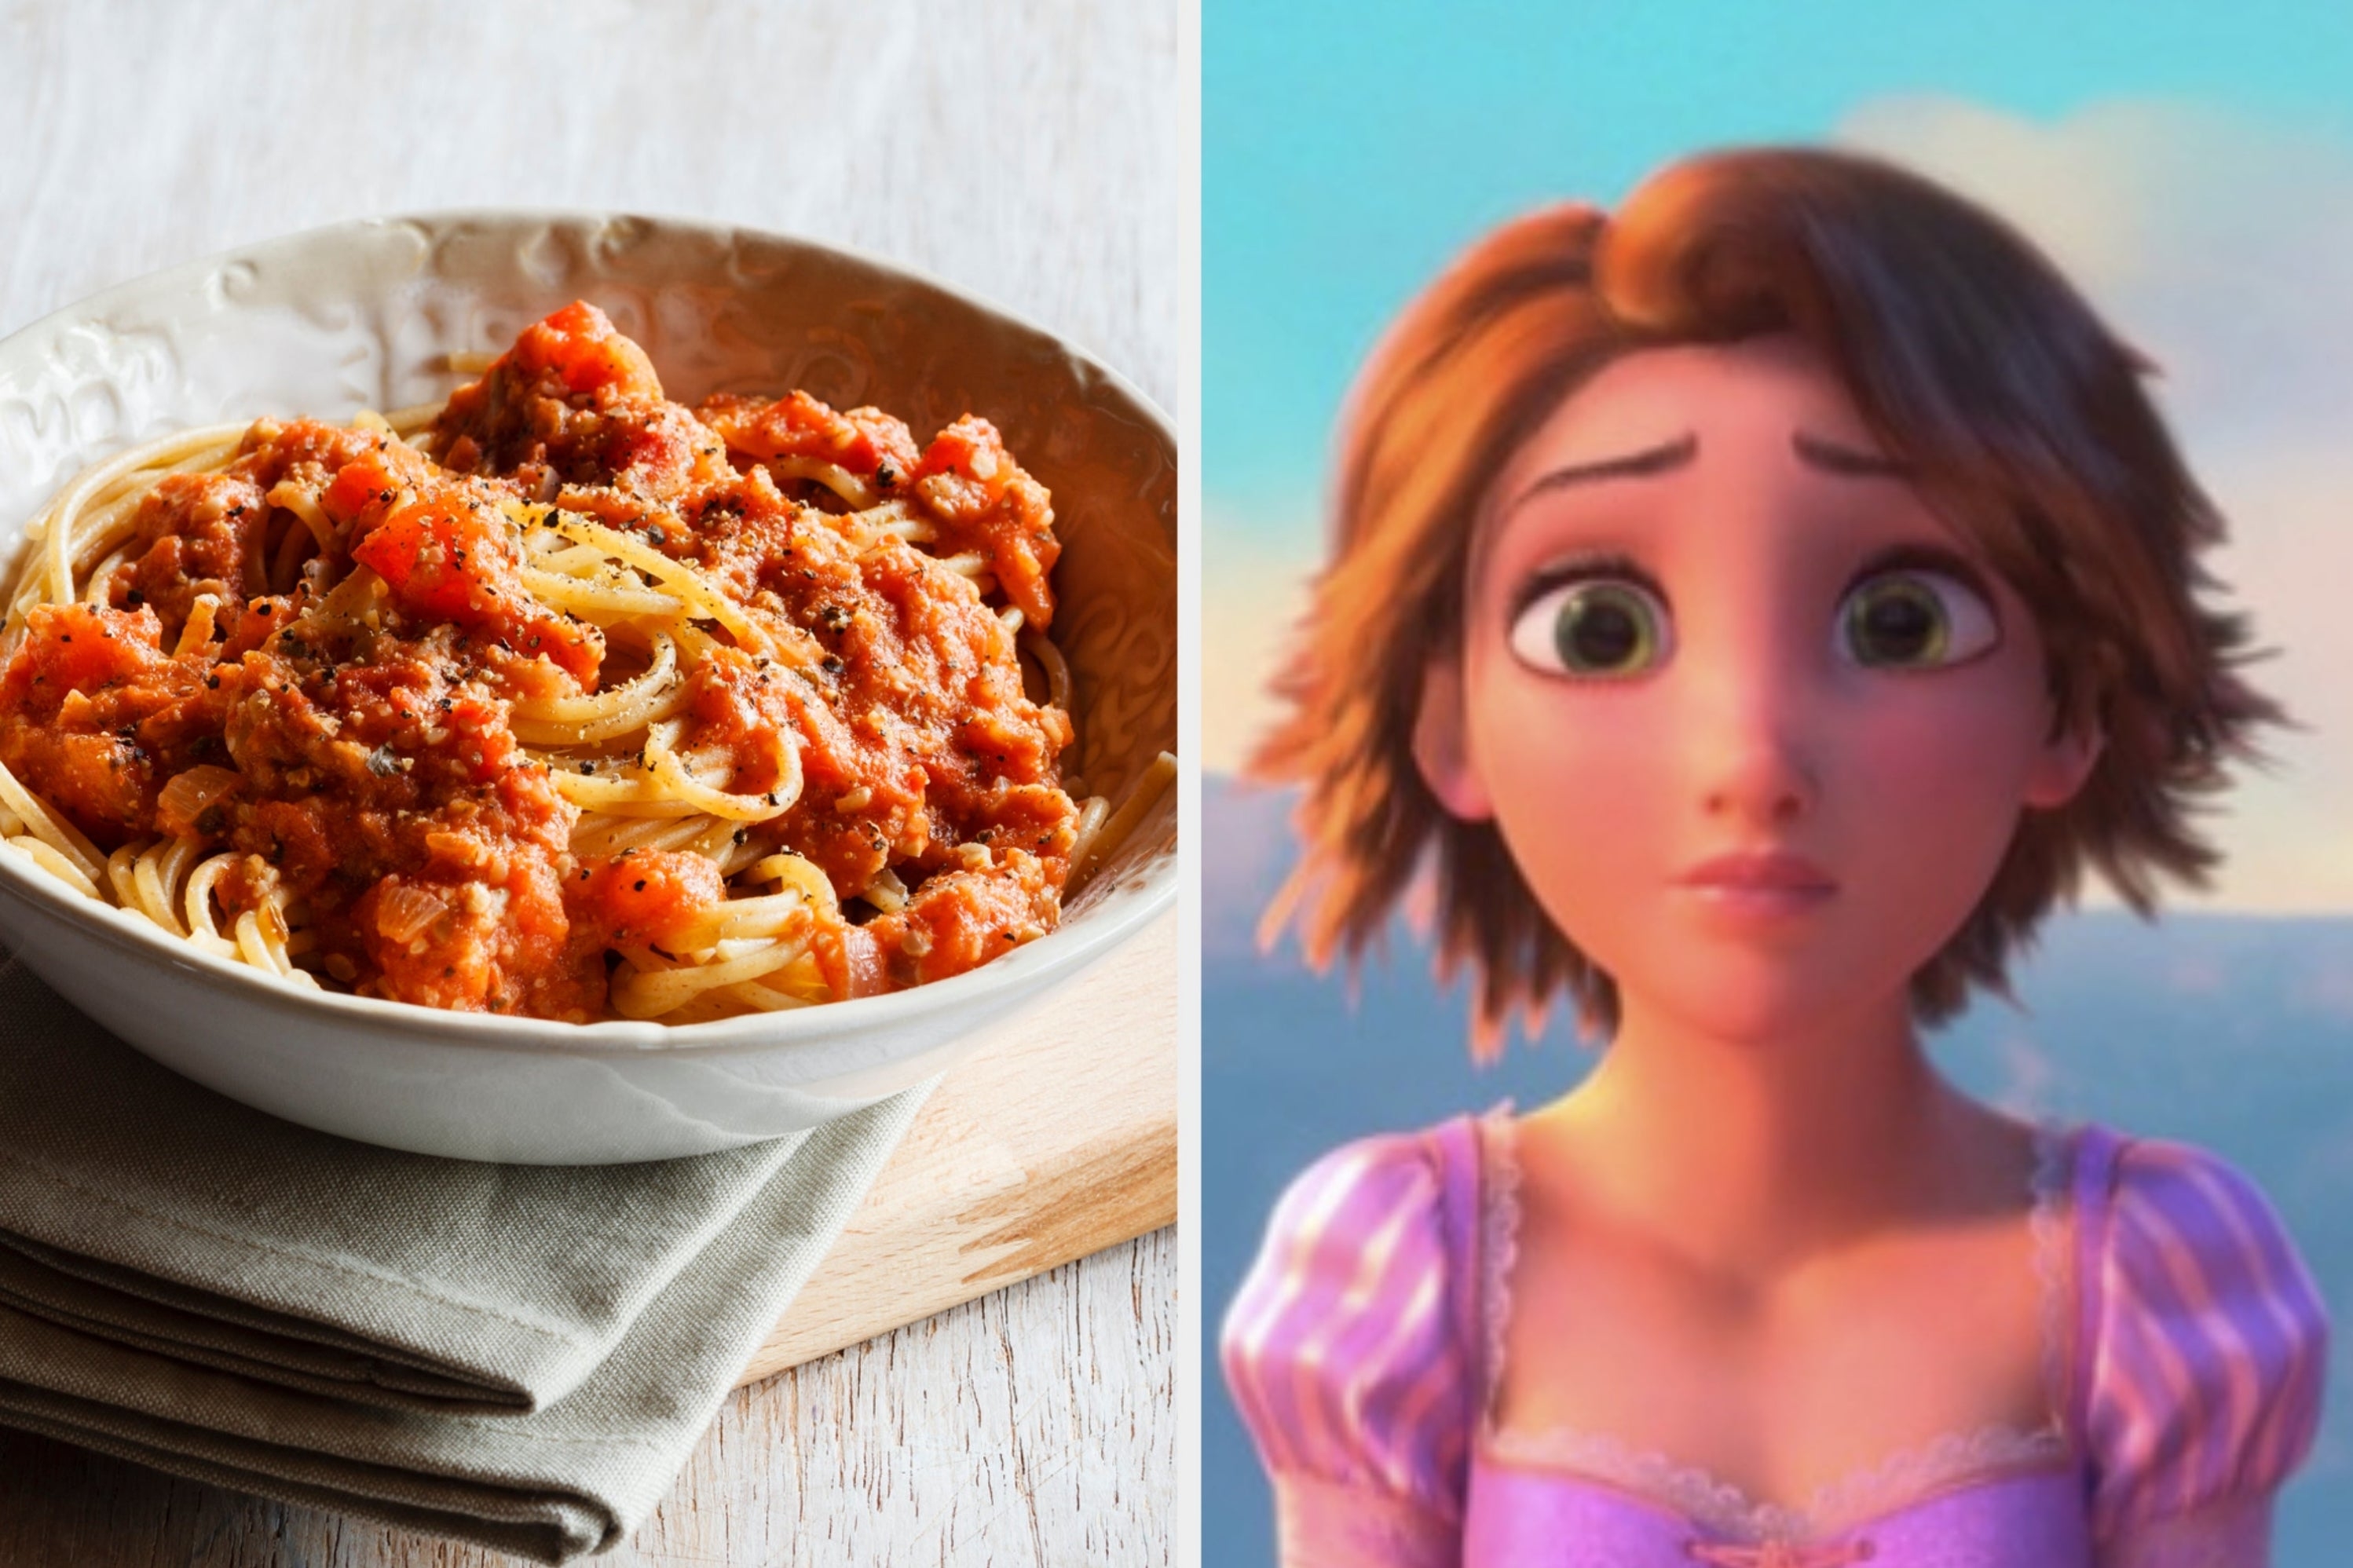 On the left, some spaghetti bolognese, and on the right, Rapunzel from Tangled with her long hair chopped off and frown on her face